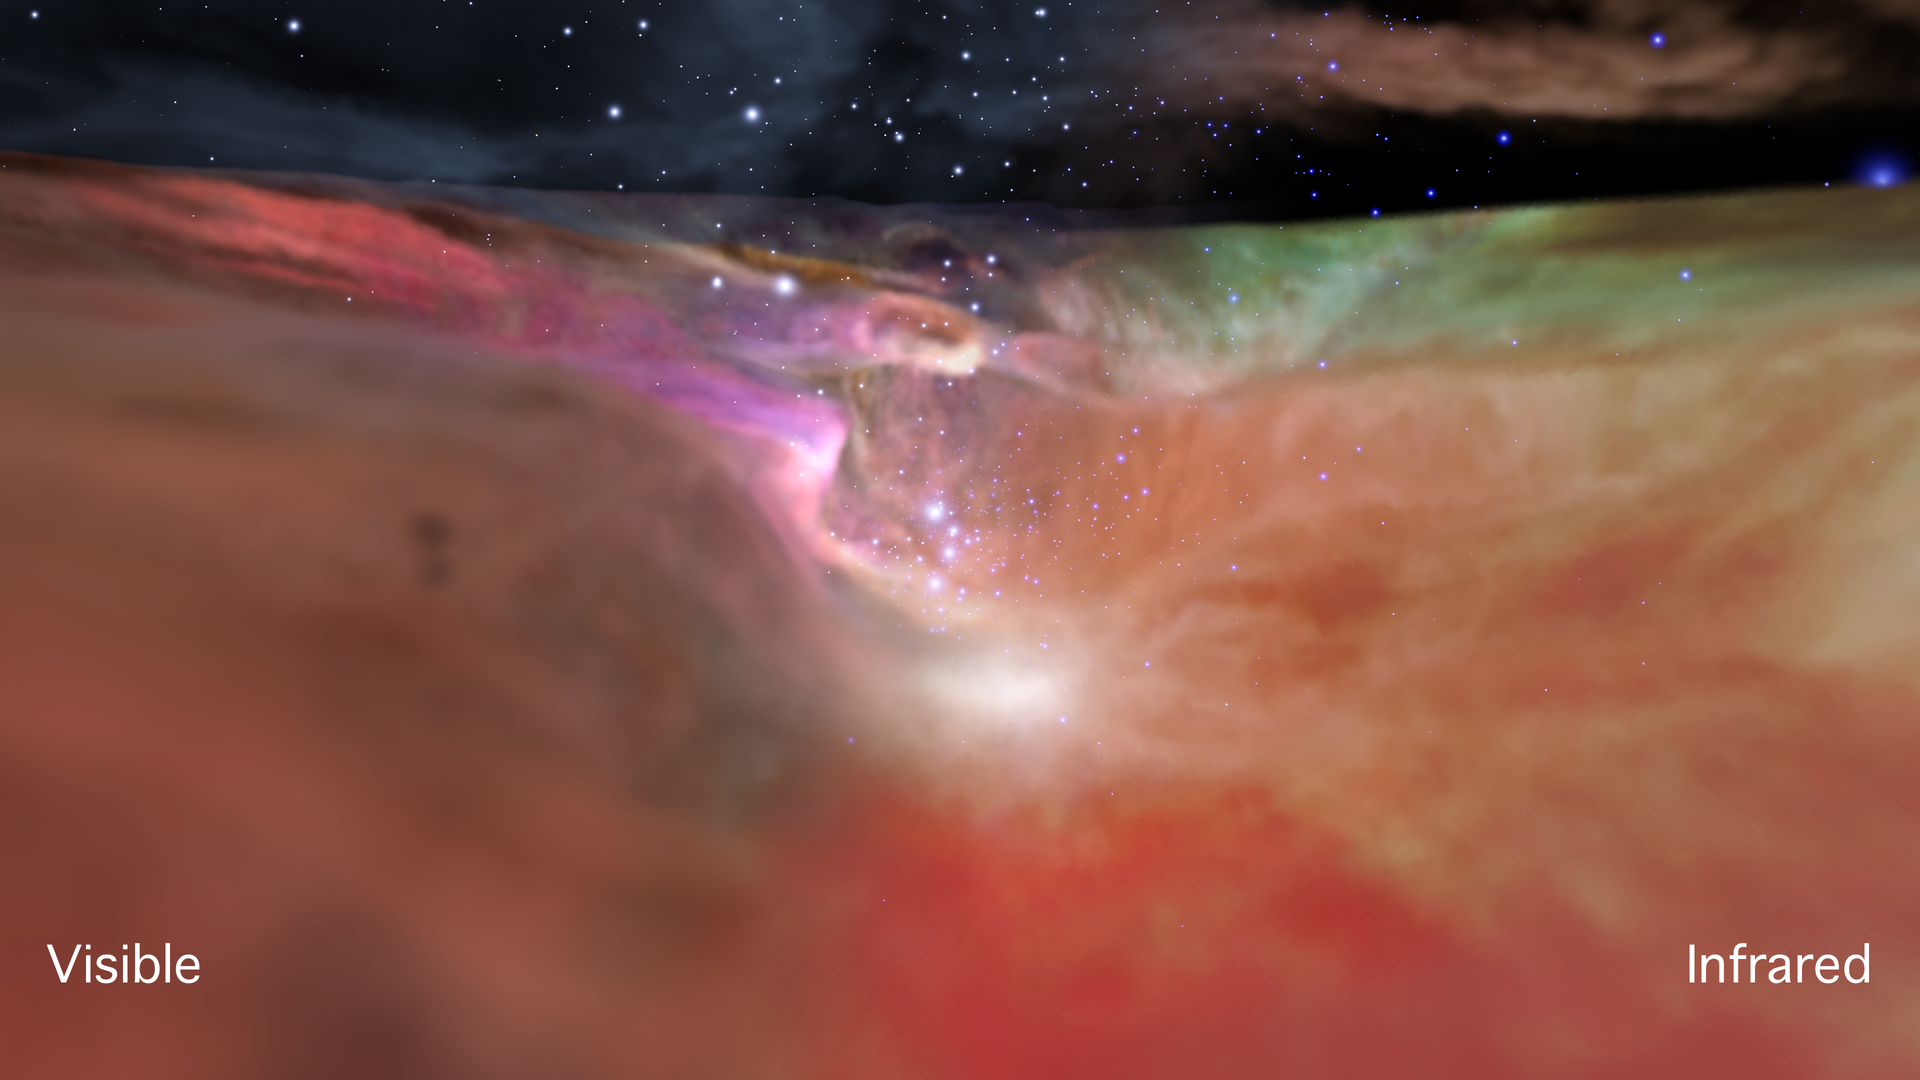 This visualization zooms into the Orion Nebula and then flies through a 3D model using both visible light (Hubble Space Telescope) and infrared light (Spitzer Space Telescope) views.